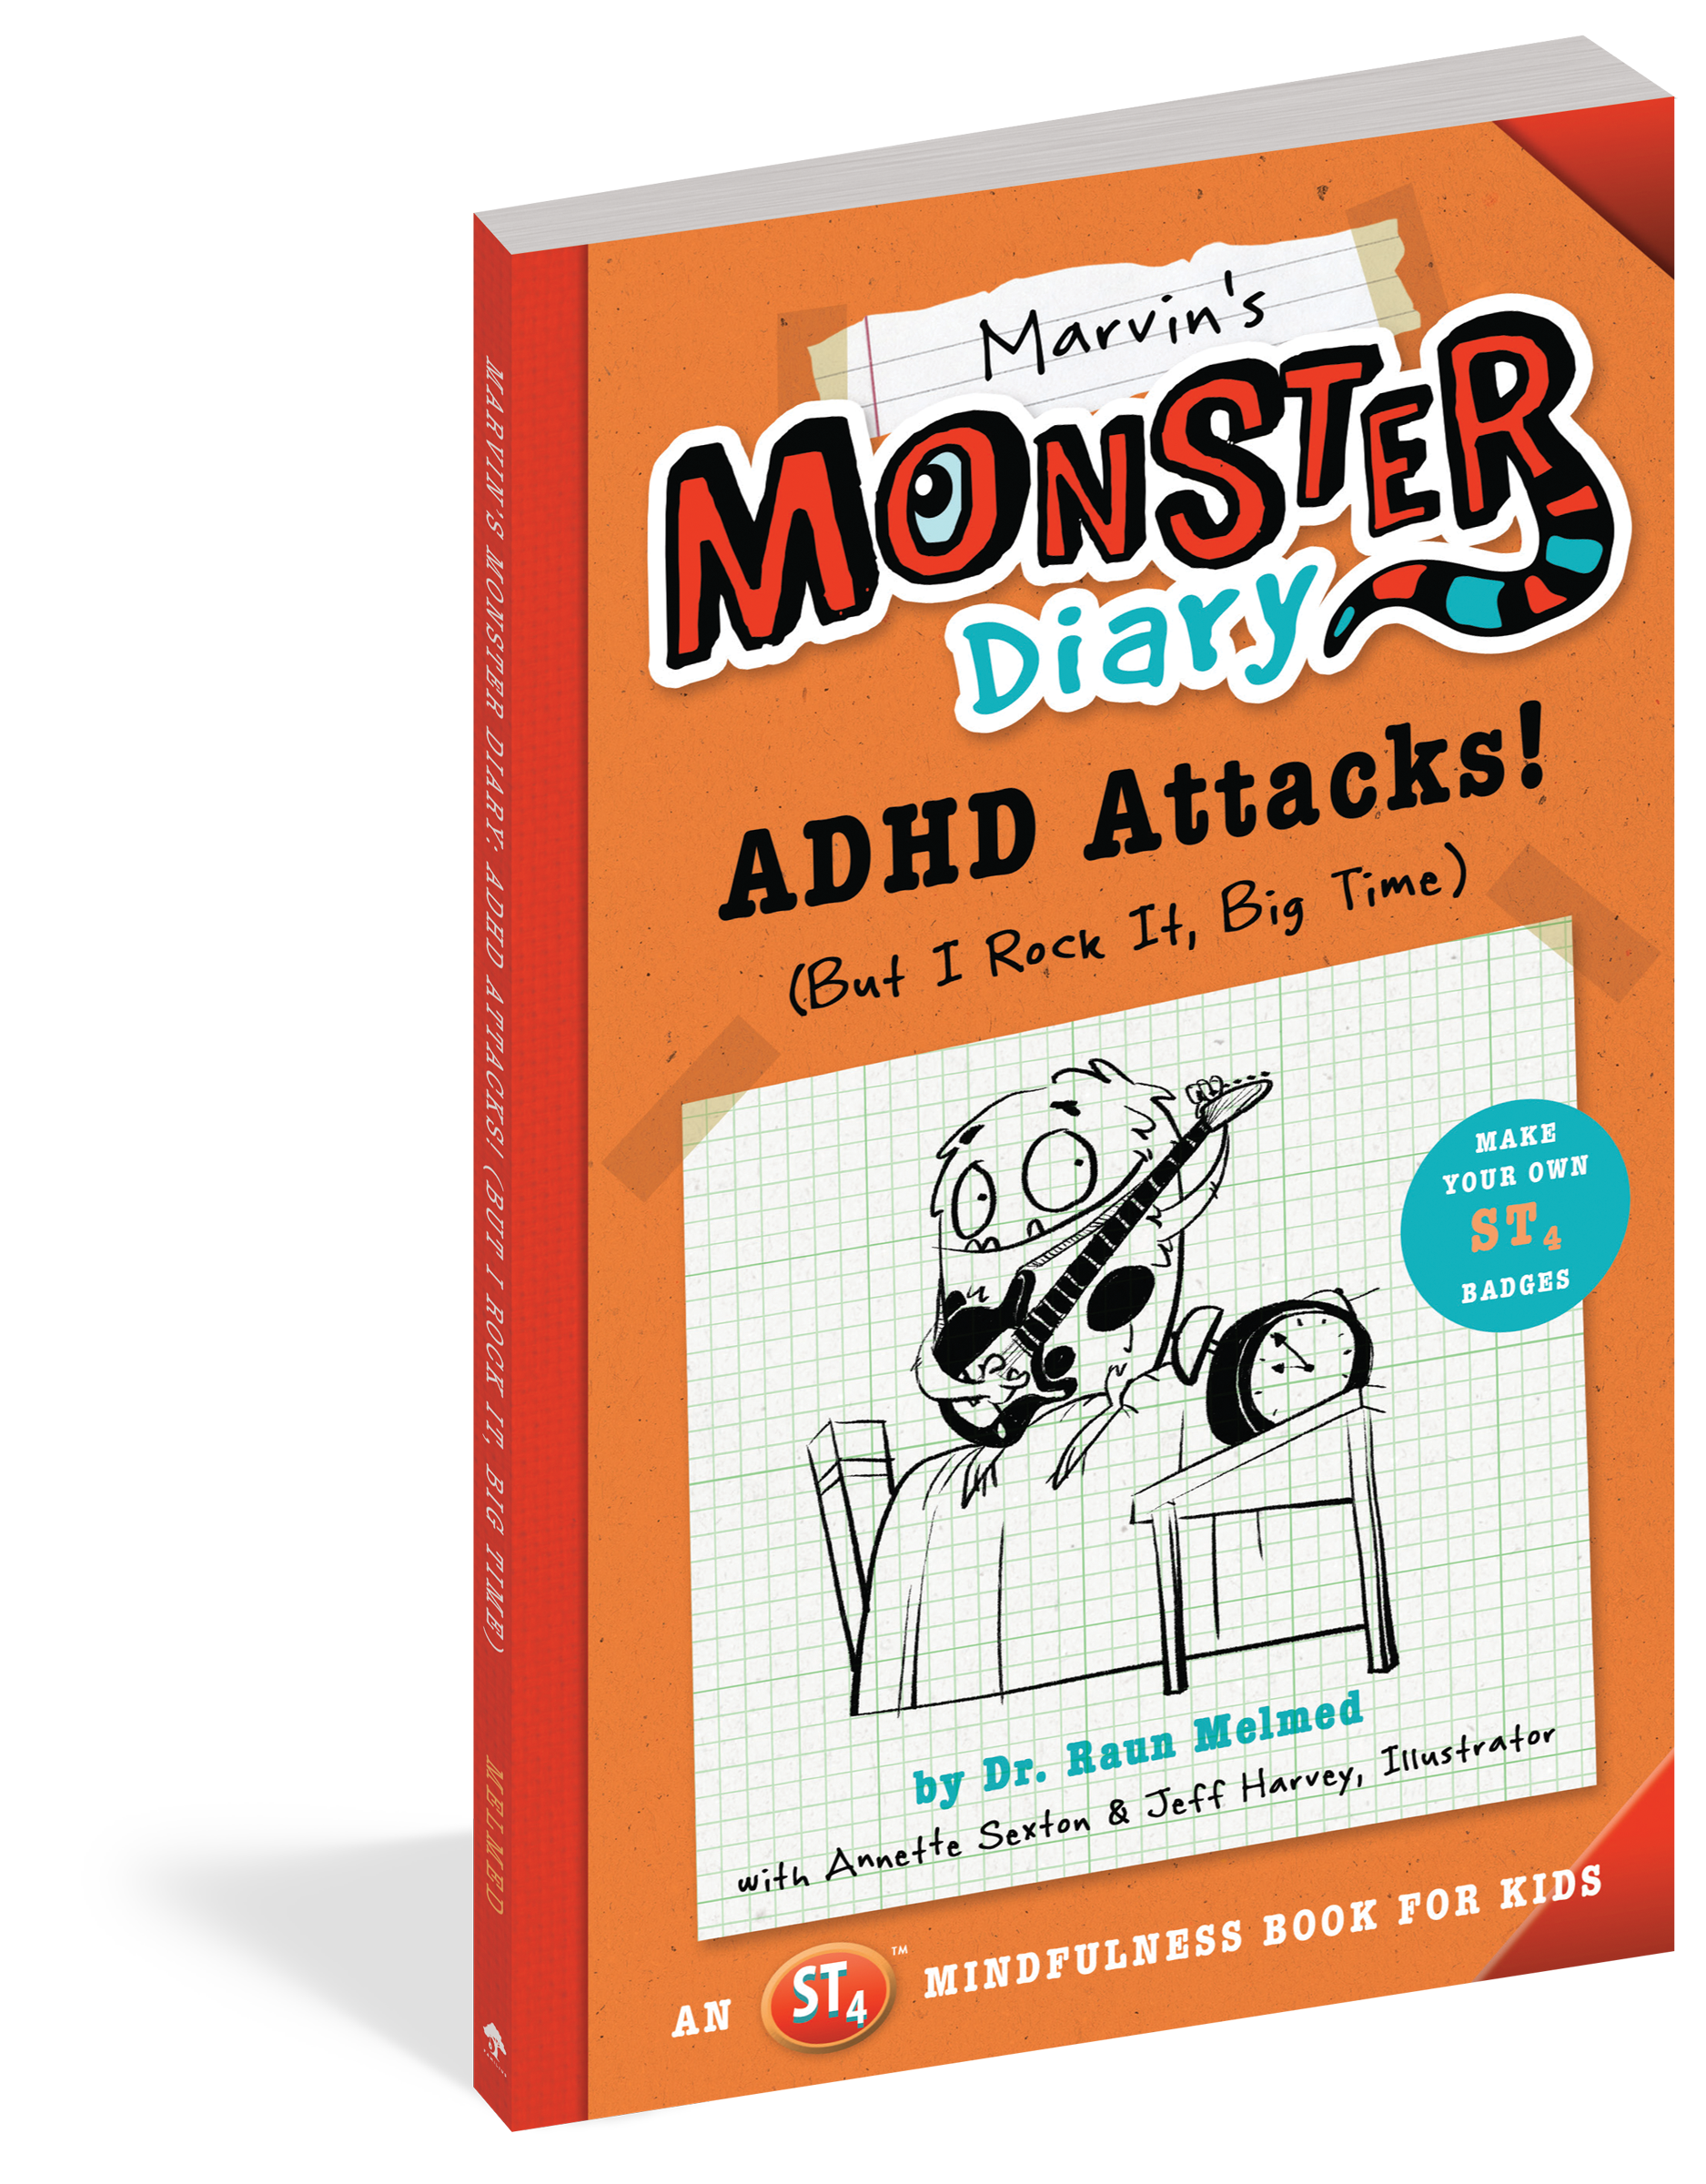 The cover of the book Marvin's Monster Diary: ADHD Attacks!